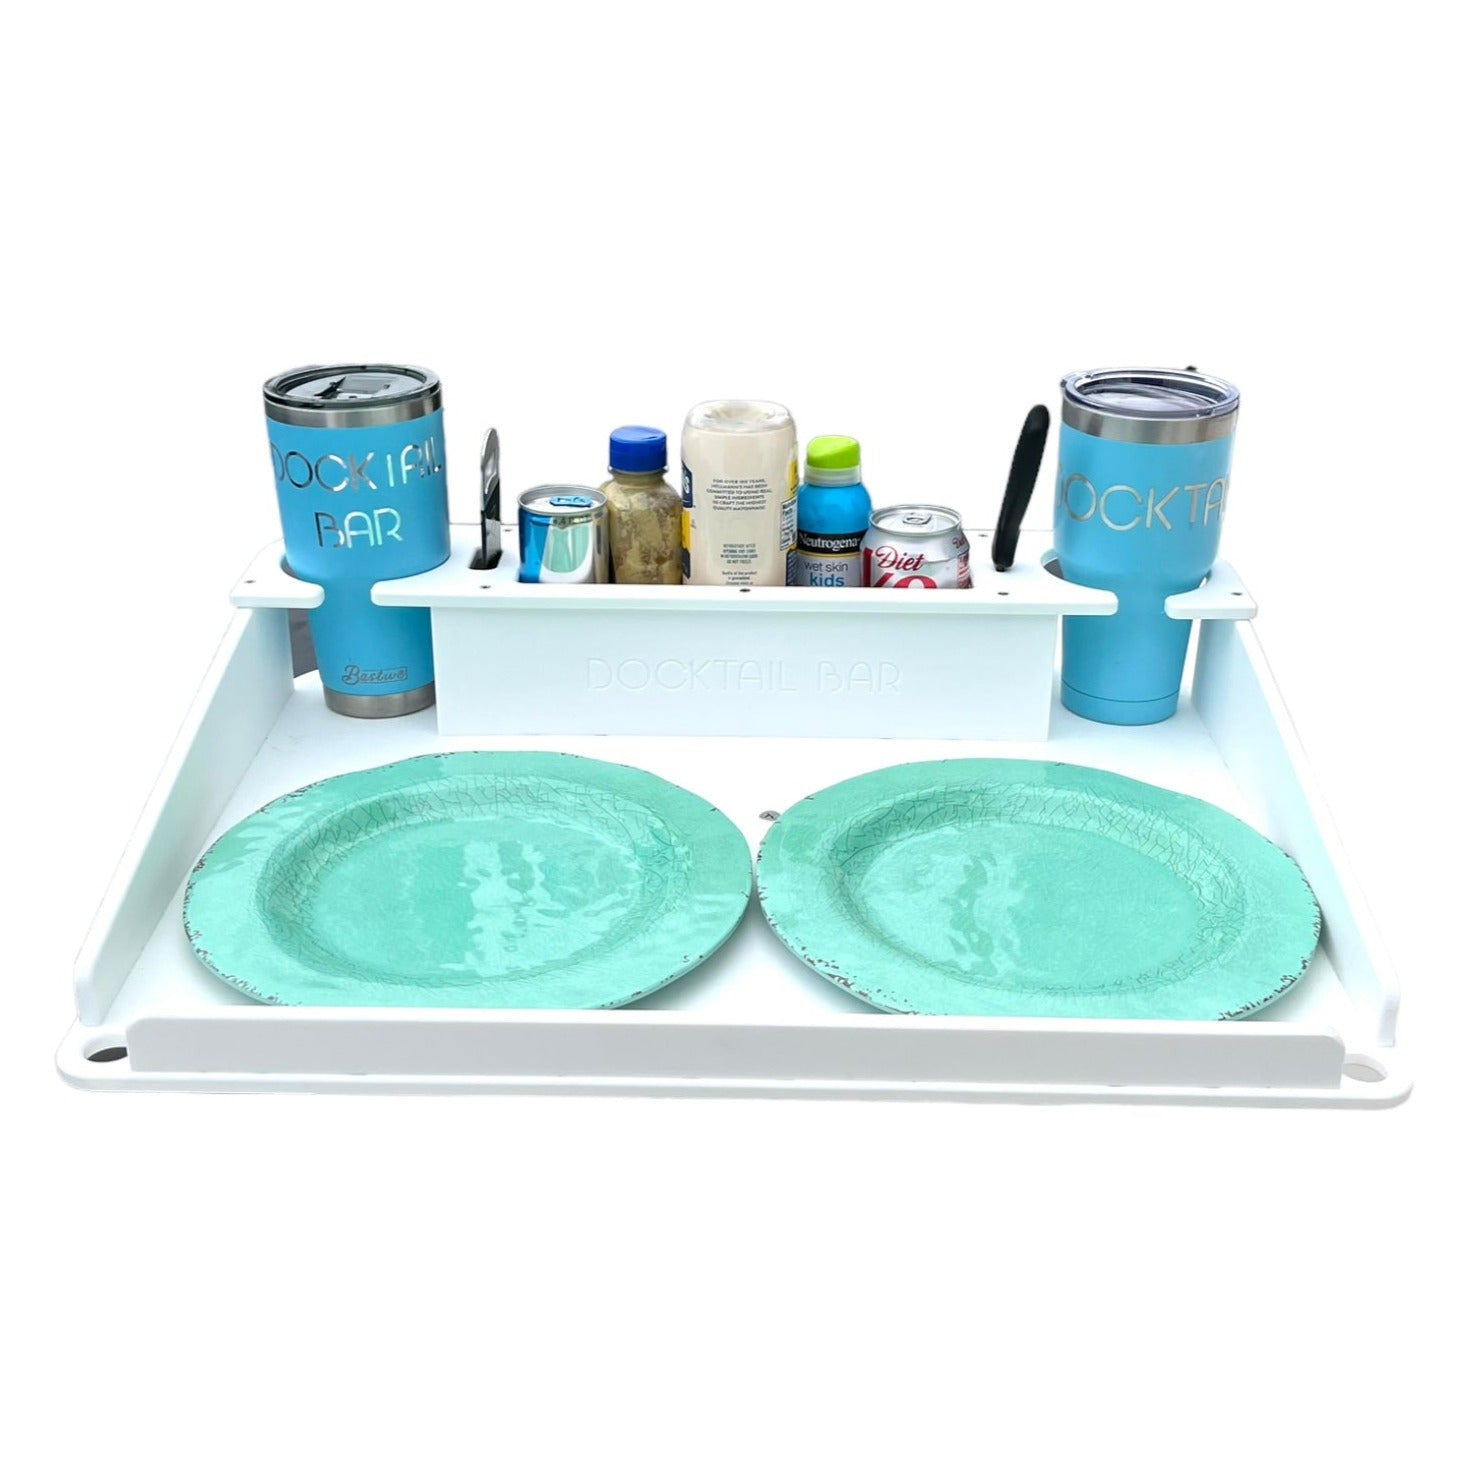 Boat Table with Cup Holders - Storage Compartment - Knife and Bottle Opener Holders - Includes Adjustable Rod Holder Mount - Weatherproof - Portable - Multiple Colors Available - Docktail Bar